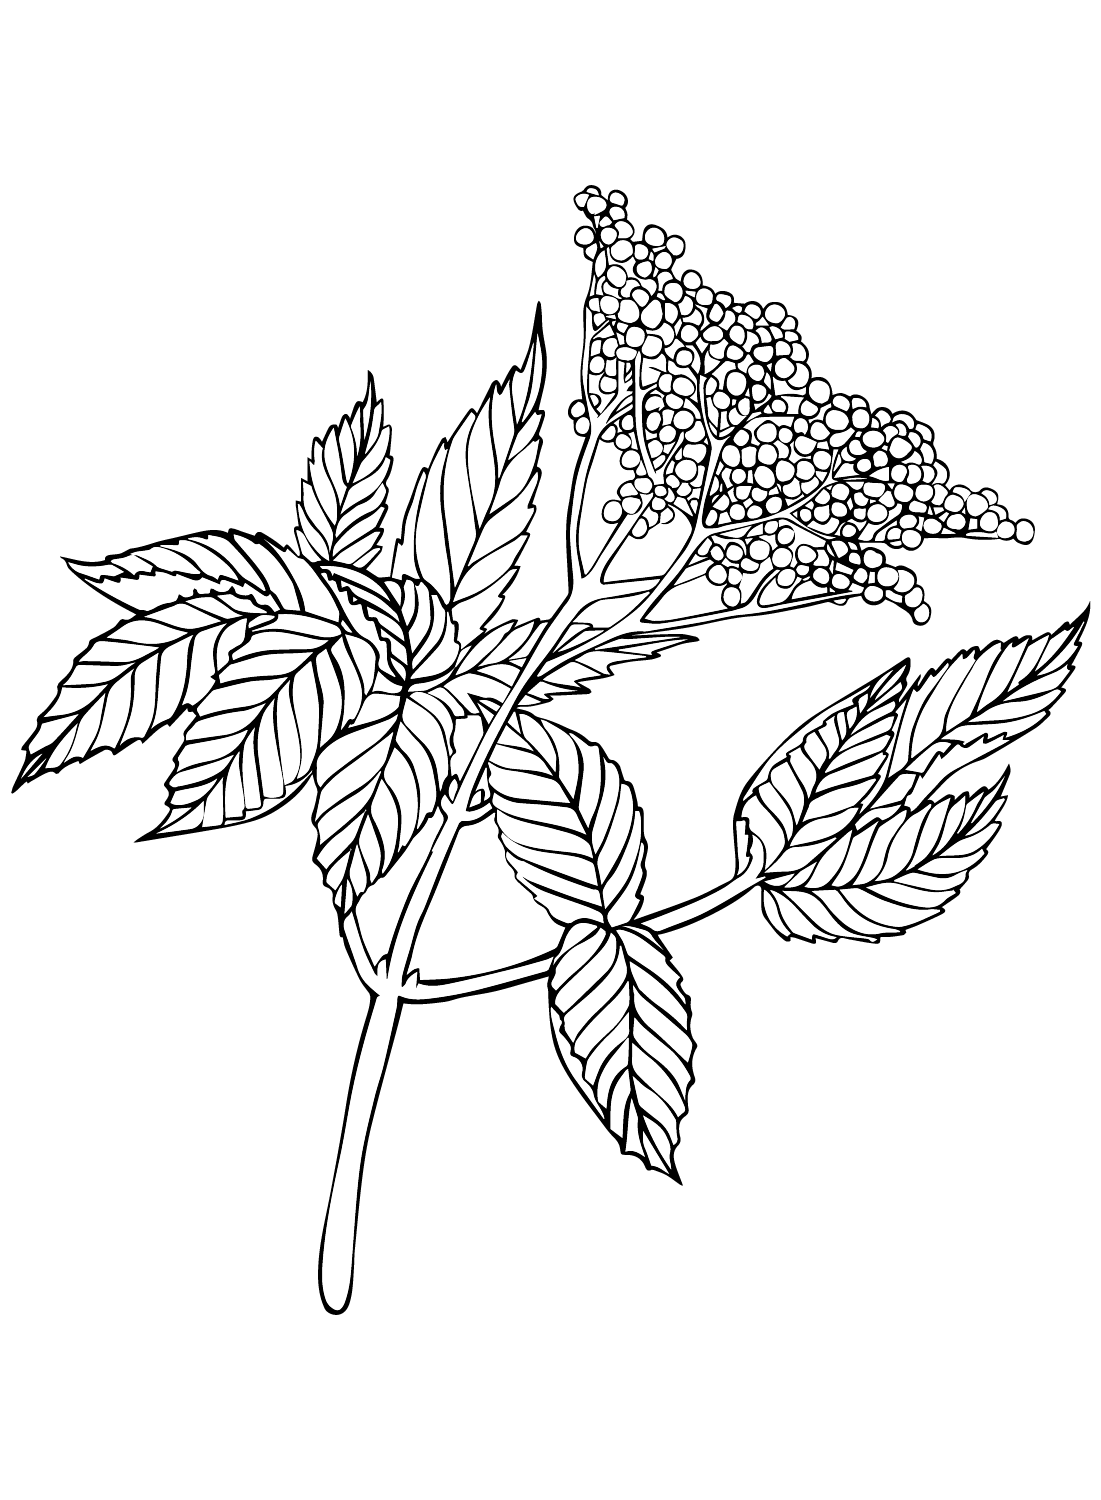 Elderberry Images Coloring Page